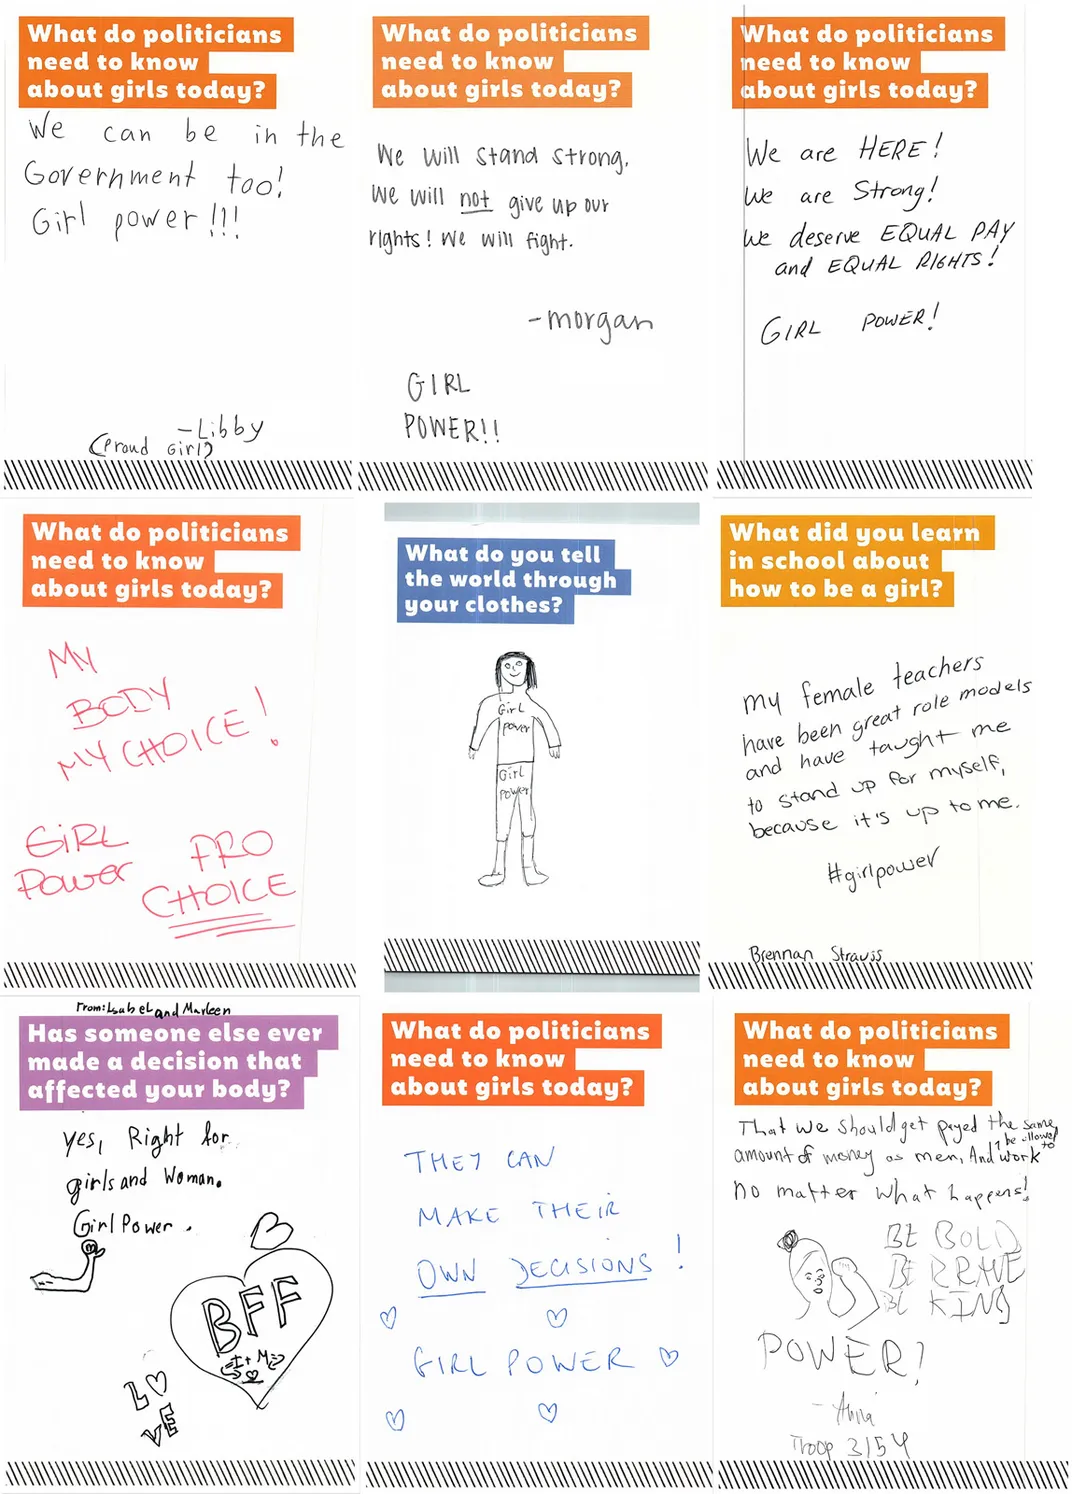 Nine cards with visitor messages. One visitor responds to the prompt "What do politicians need to know about girls today" with a message that includes "We will stand strong. We will not give up our rights! We will fight."